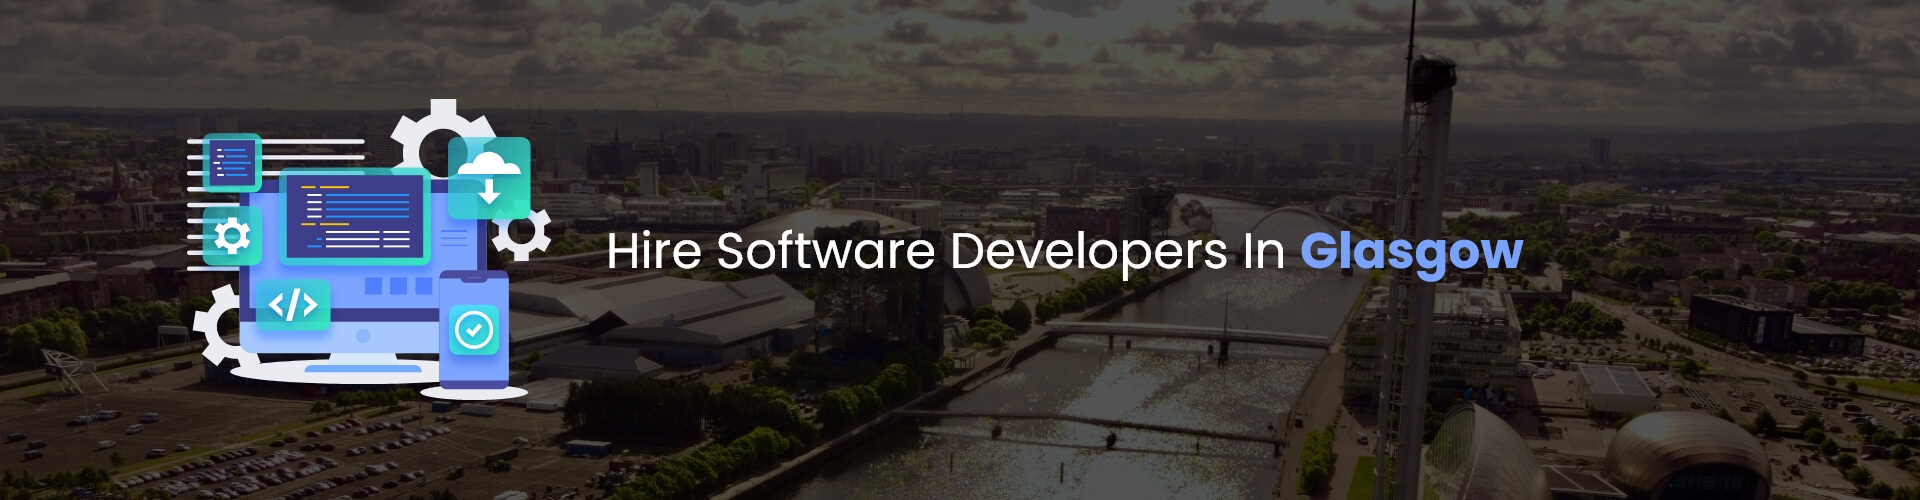 hire software developers in glasgow